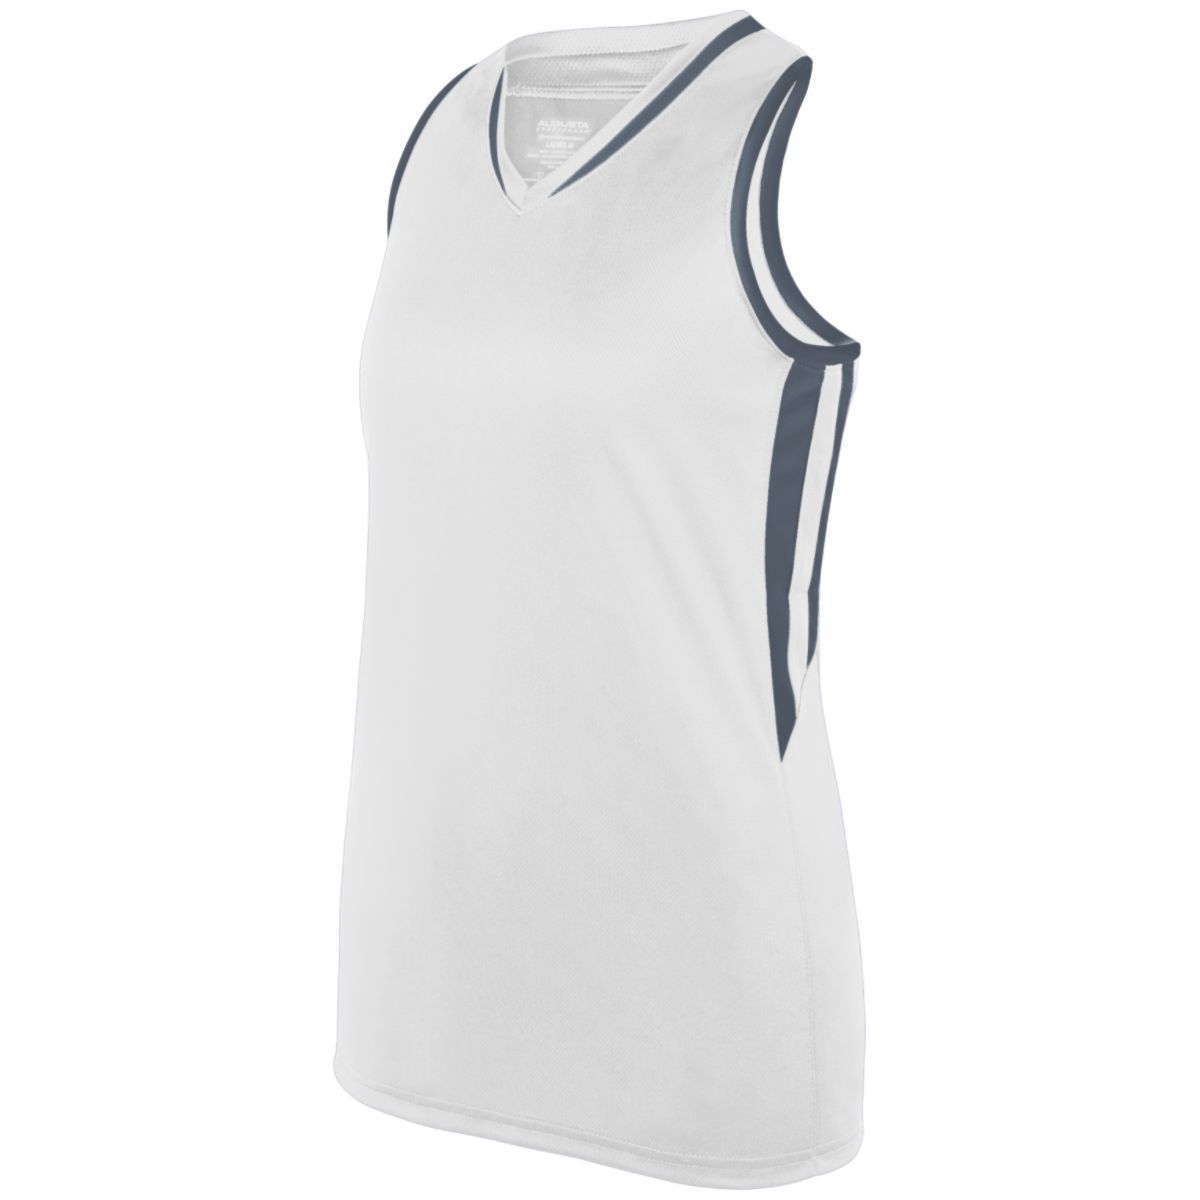 Augusta Sportswear Girls Full Force Tank in White/Graphite  -Part of the Girls, Augusta-Products, Girls-Tank, Shirts product lines at KanaleyCreations.com